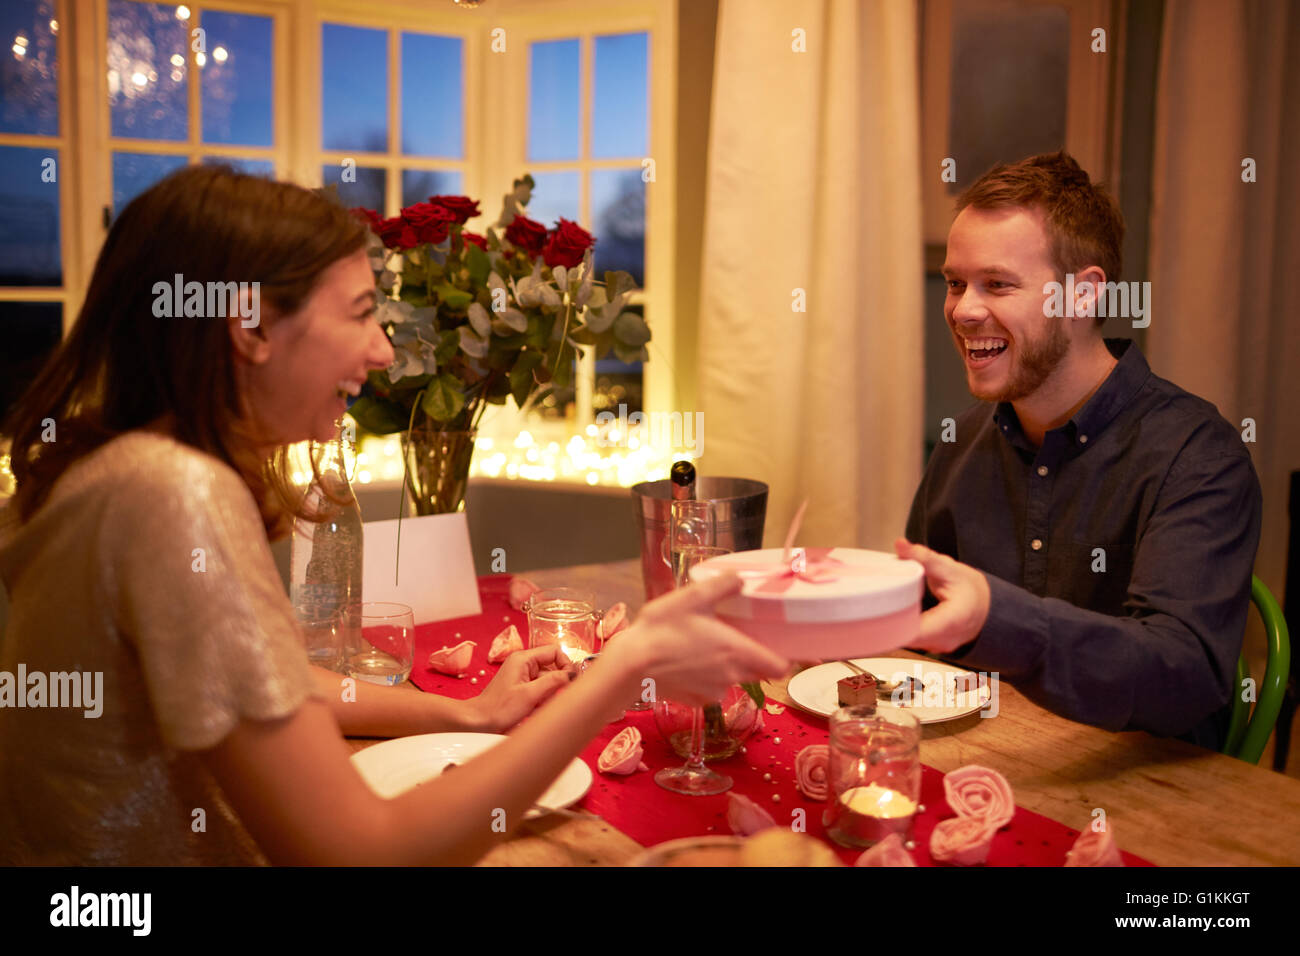 Man Gives Woman Gift At Romantic Valentines Day Meal Stock Photo